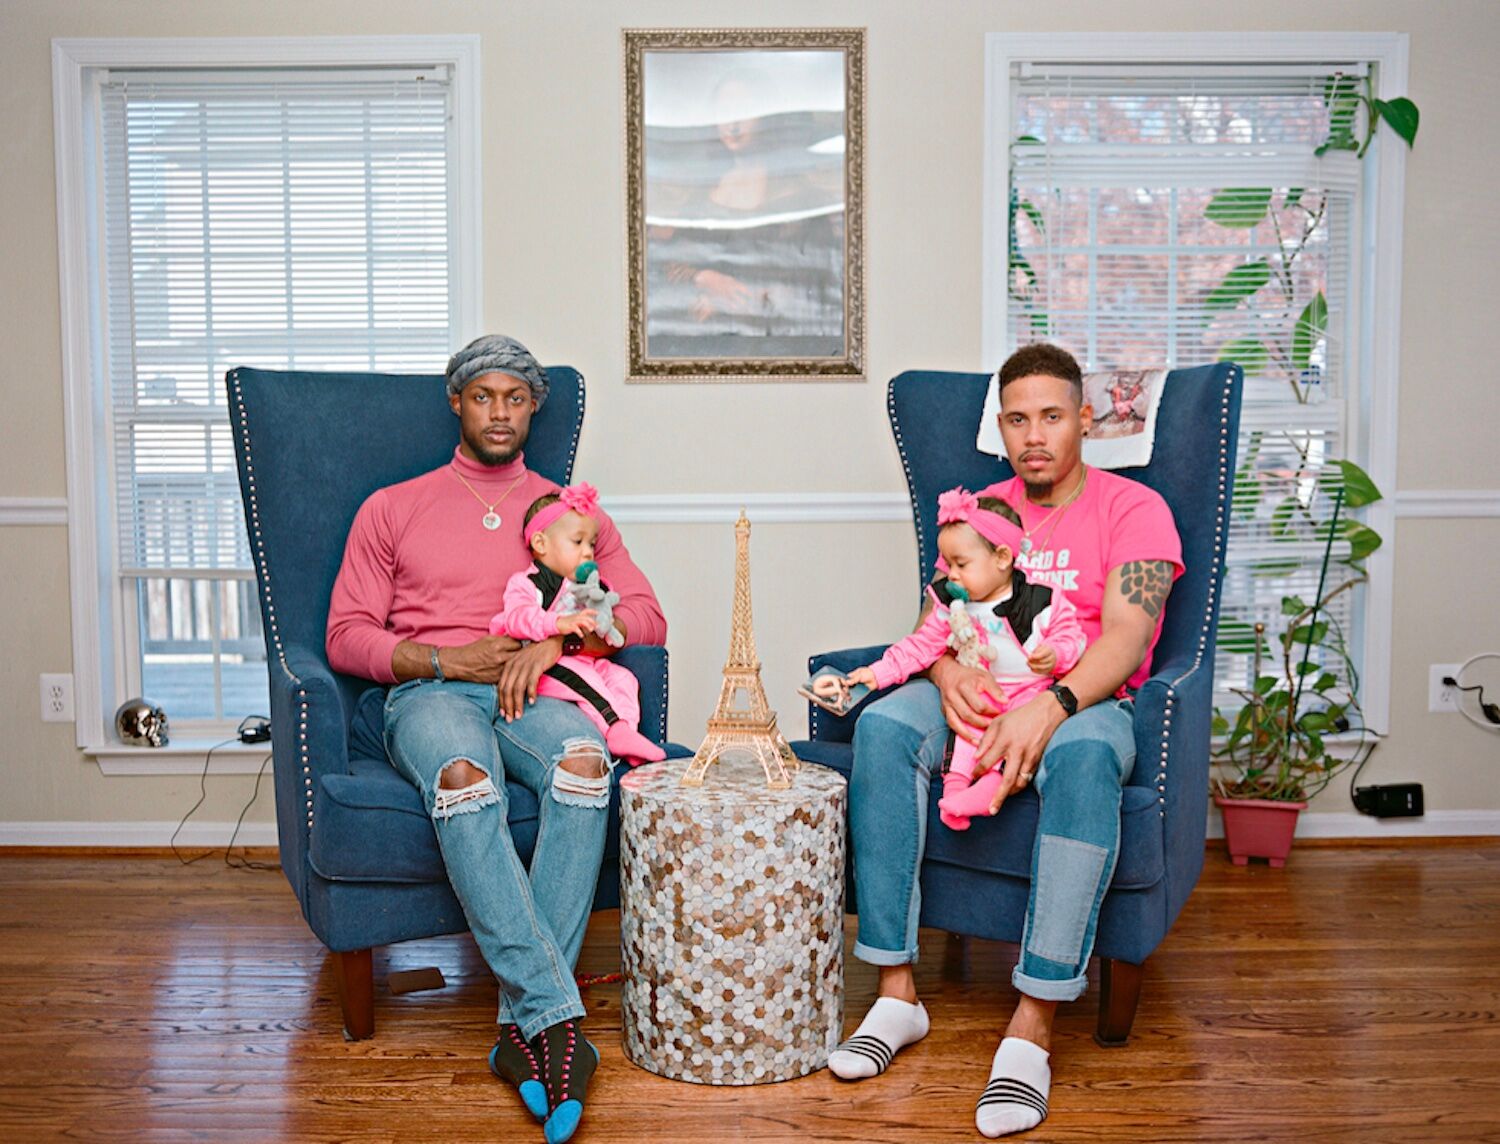 Vernon Leftwich and Ricardo Cooper with their twin daughters, Harper and Knox, from “Dads”: Photo copyright Bart Heynen, courtesy powerHouse Books